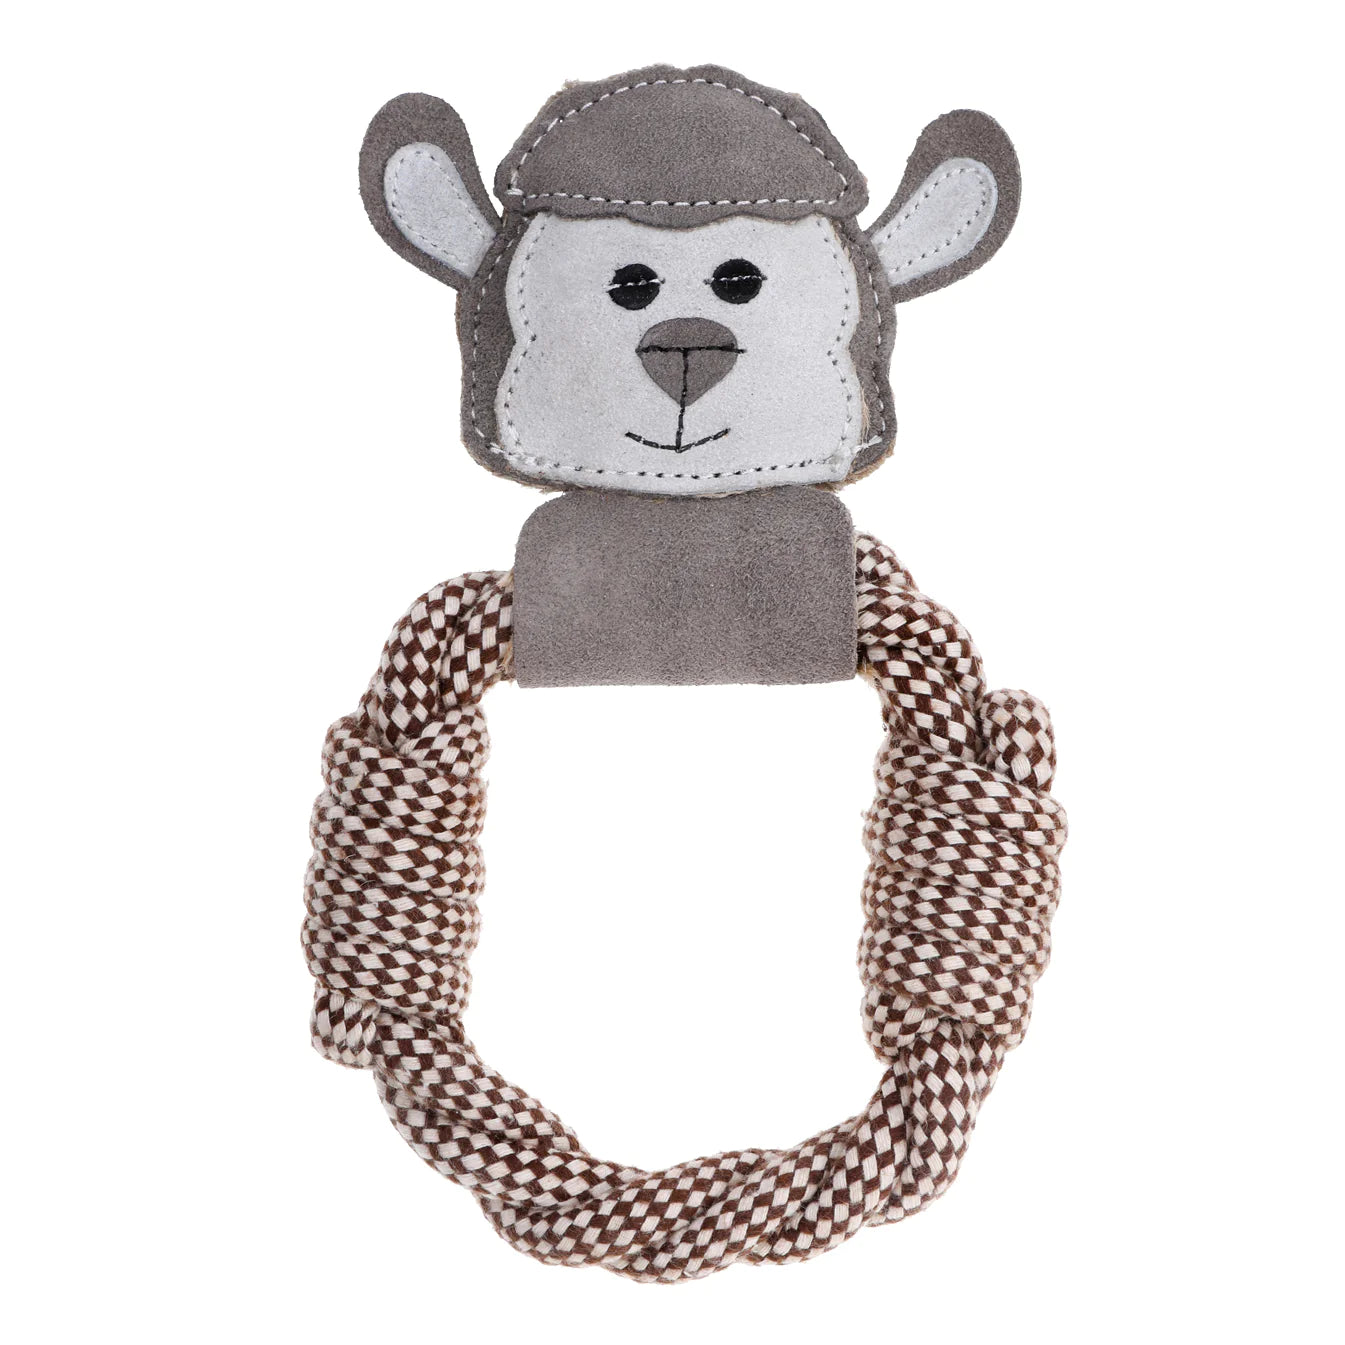 Doog Country Tails Sheep Rope Ring Toy Grey 24